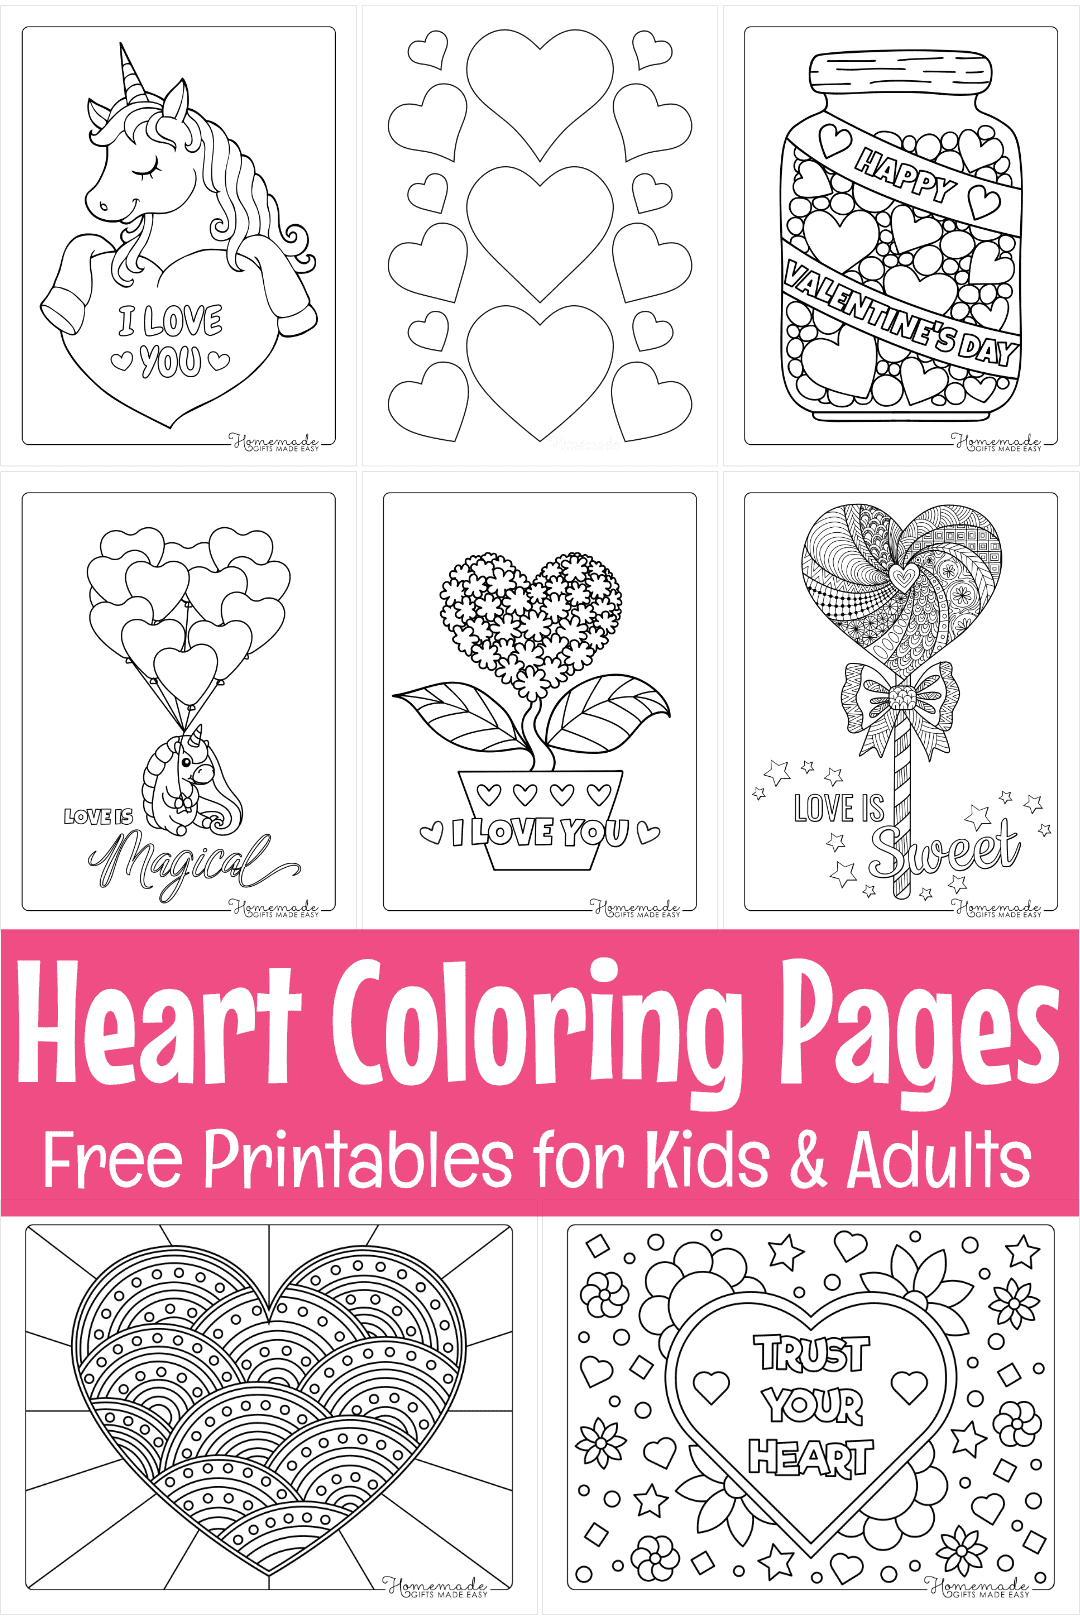 Homemade Gifts Made Easy Coloring Image to u